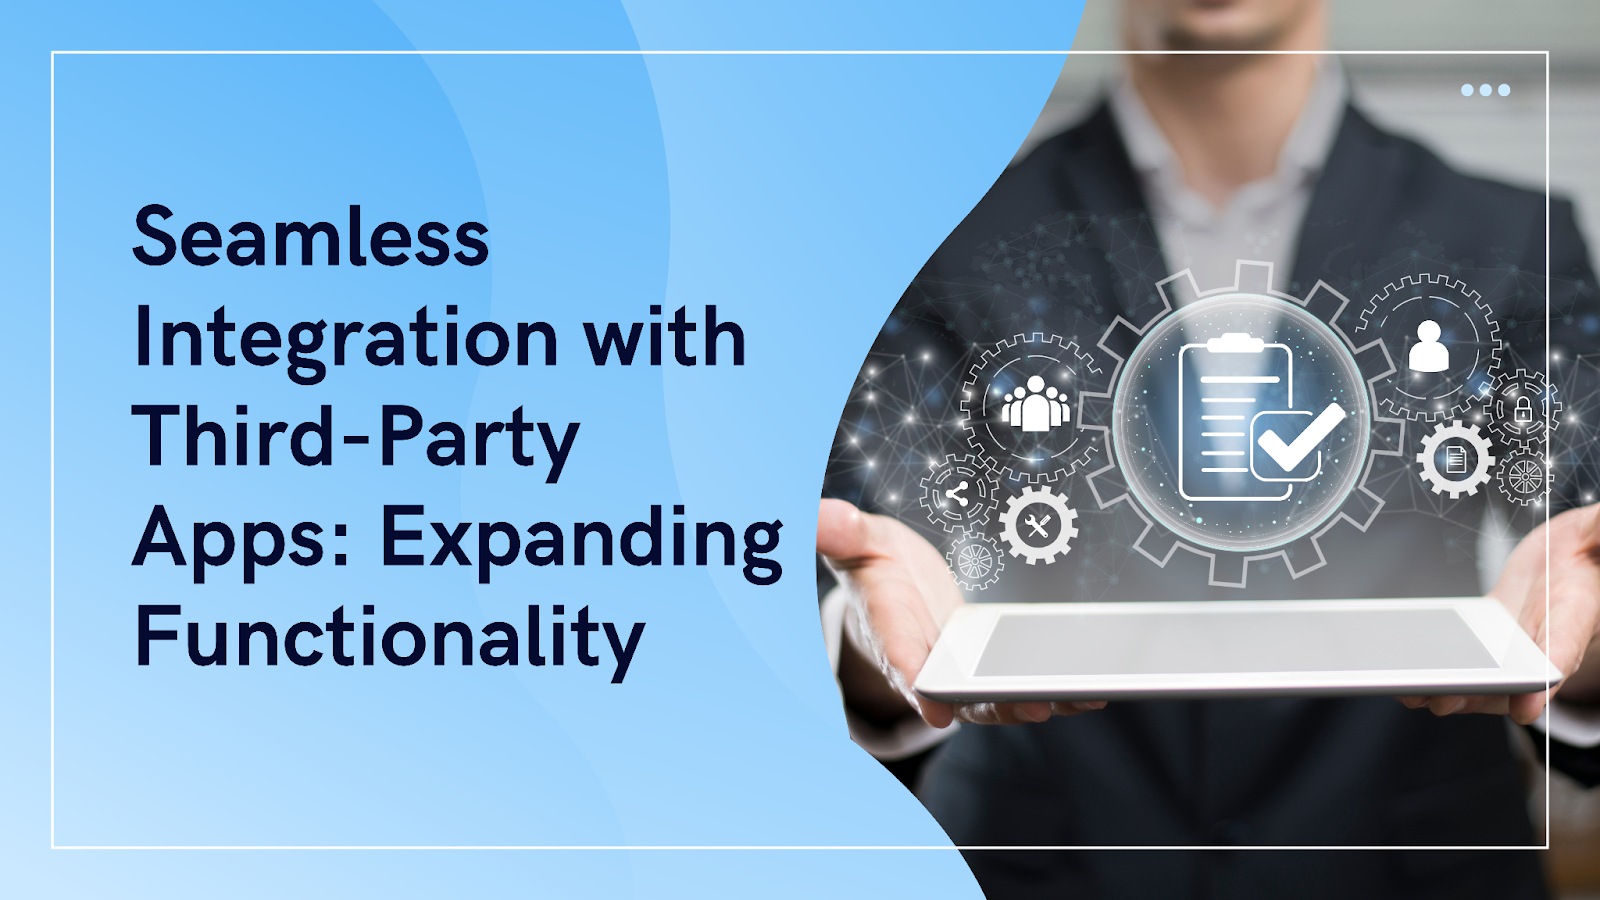 Seamless Integration with Third-Party Apps Expanding Functionality 6